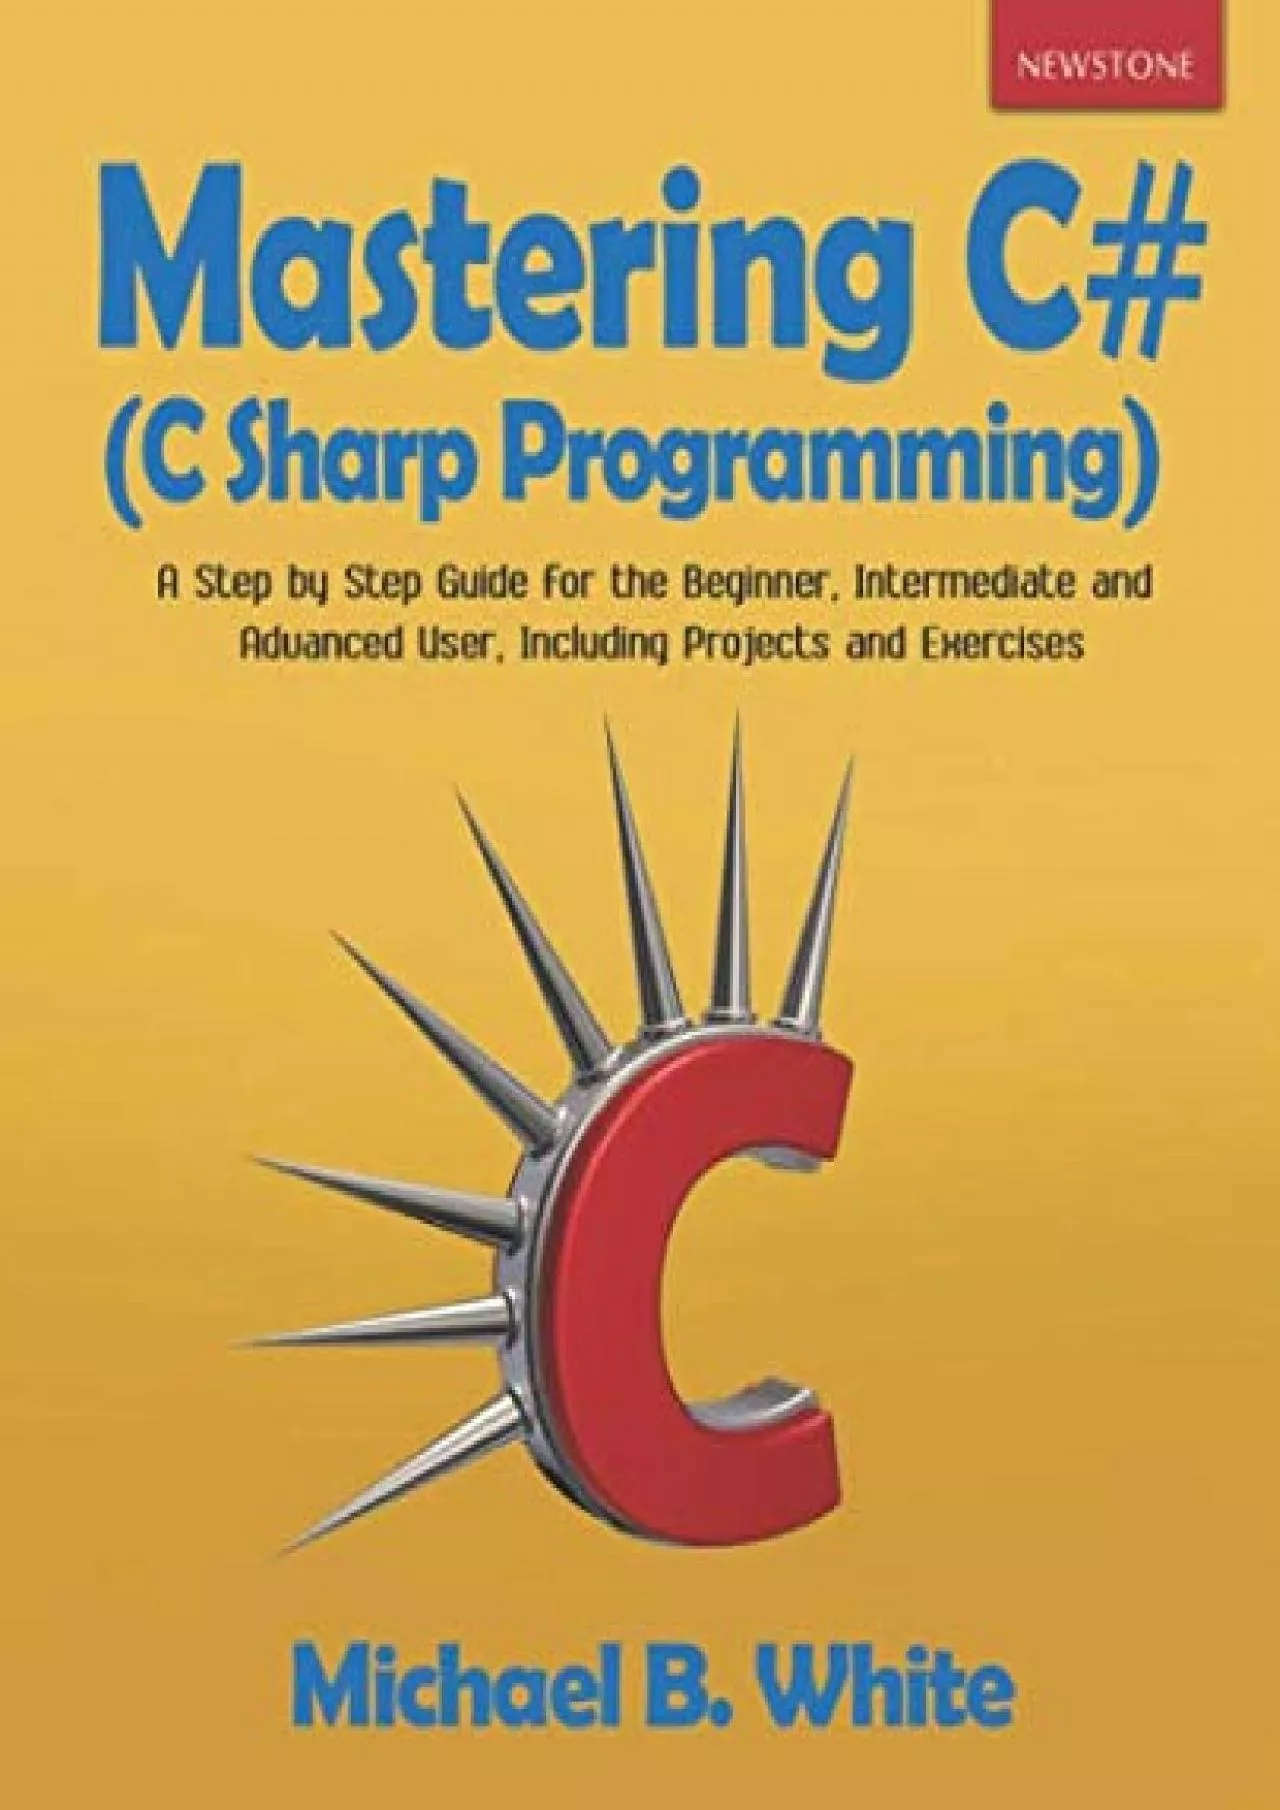 [BEST]-Mastering C (C Sharp Programming): A Step by Step Guide for the Beginner, Intermediate